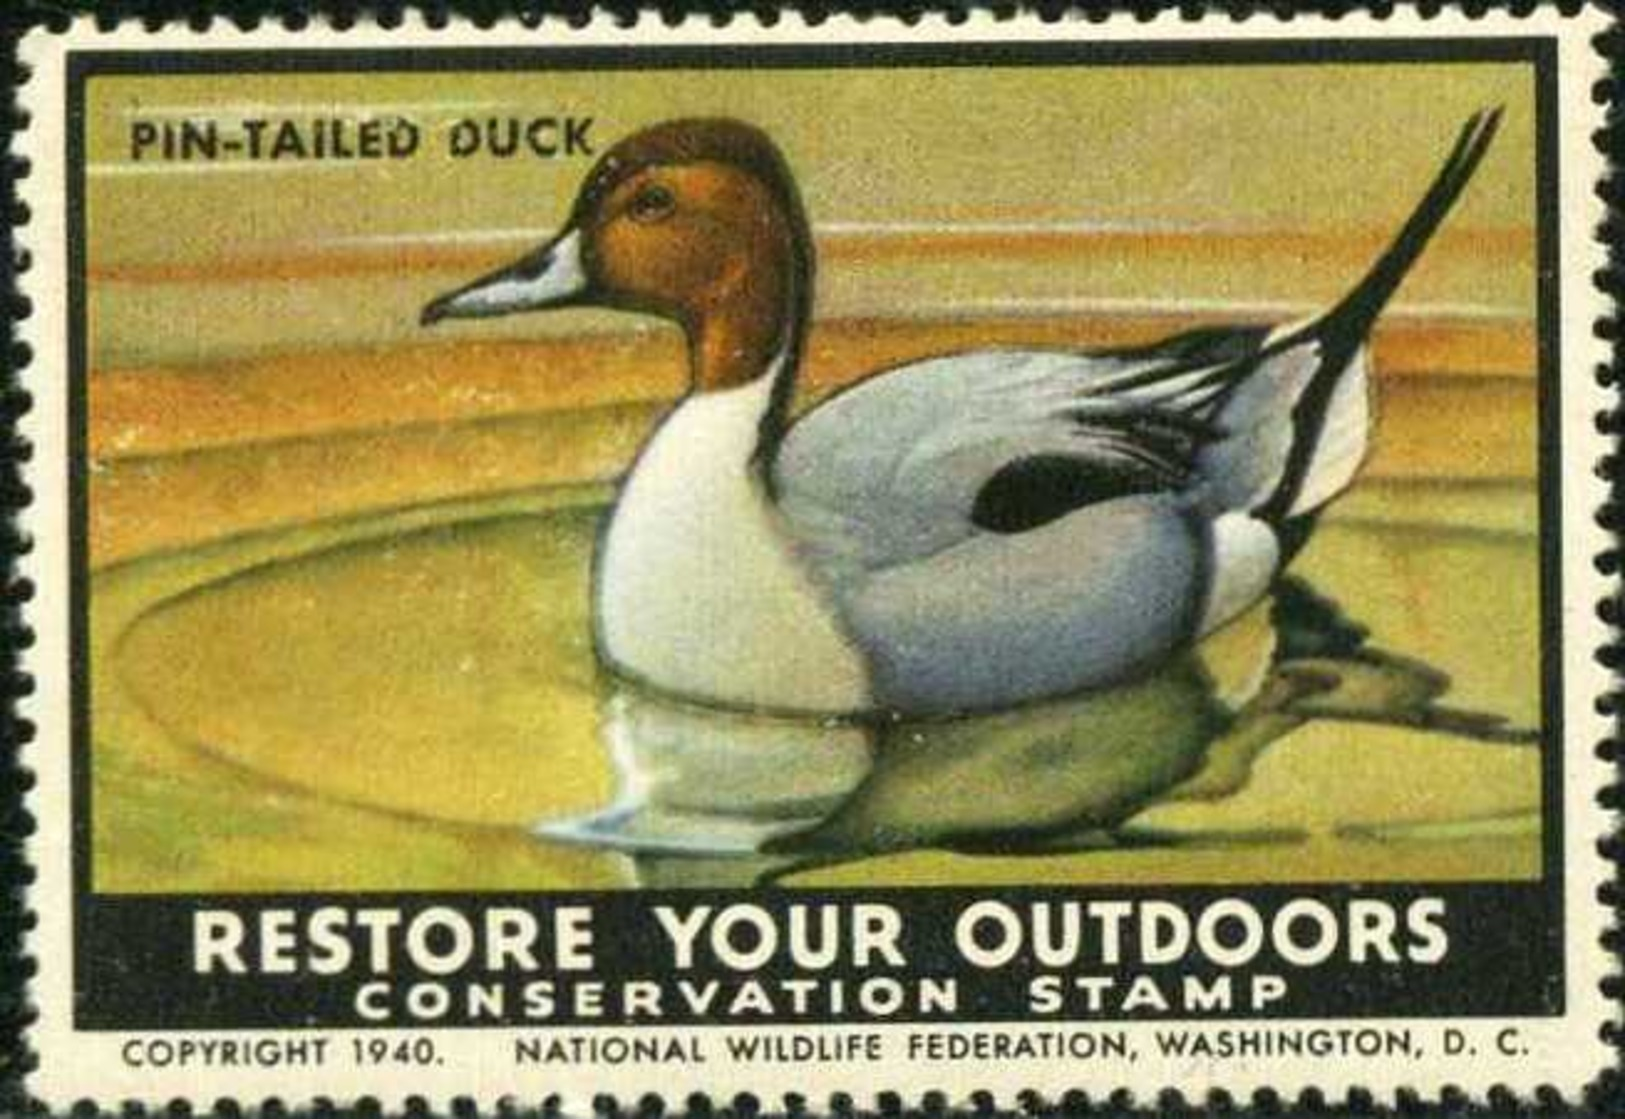 USA 1940! Pin-tailed Duck, Canards, Ente, Water Birds. Timbre / Vignette (4,5 X 6 Cm) NWF - Eenden